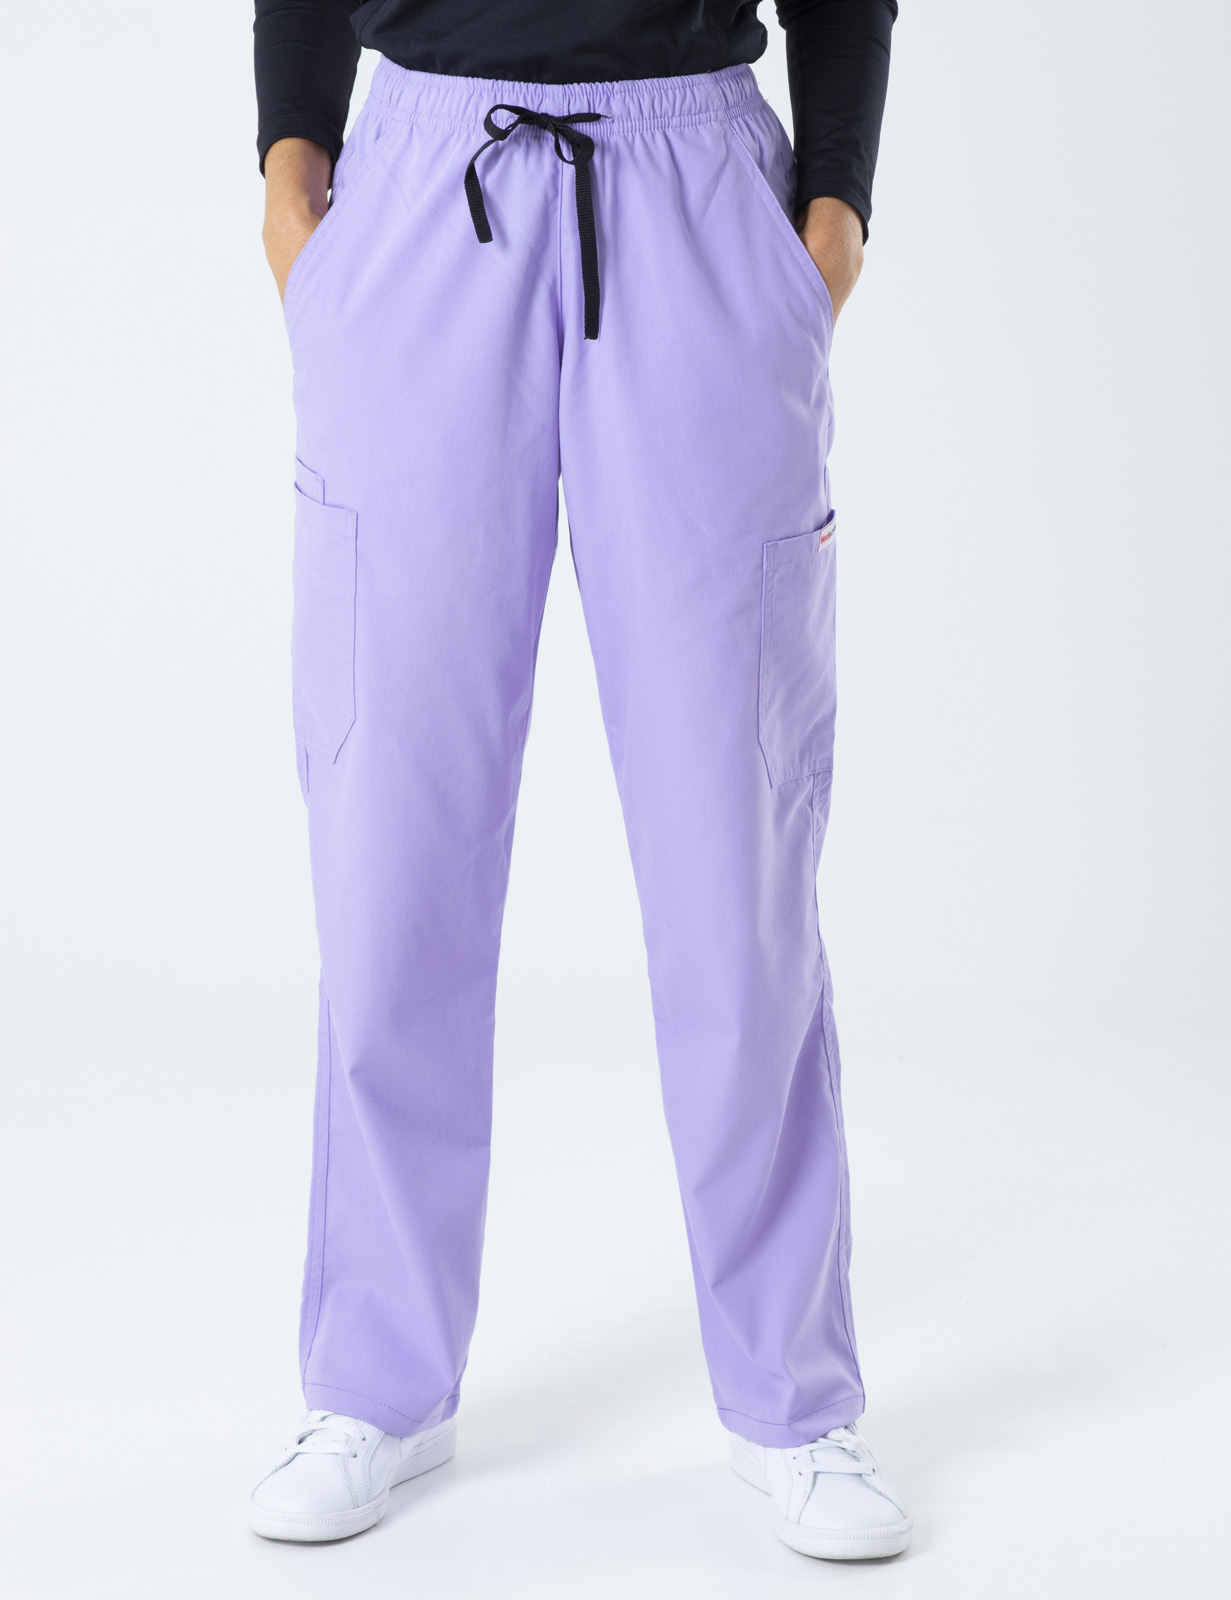 Women's Cargo Performance Pants - Lilac - 4X large - Tall